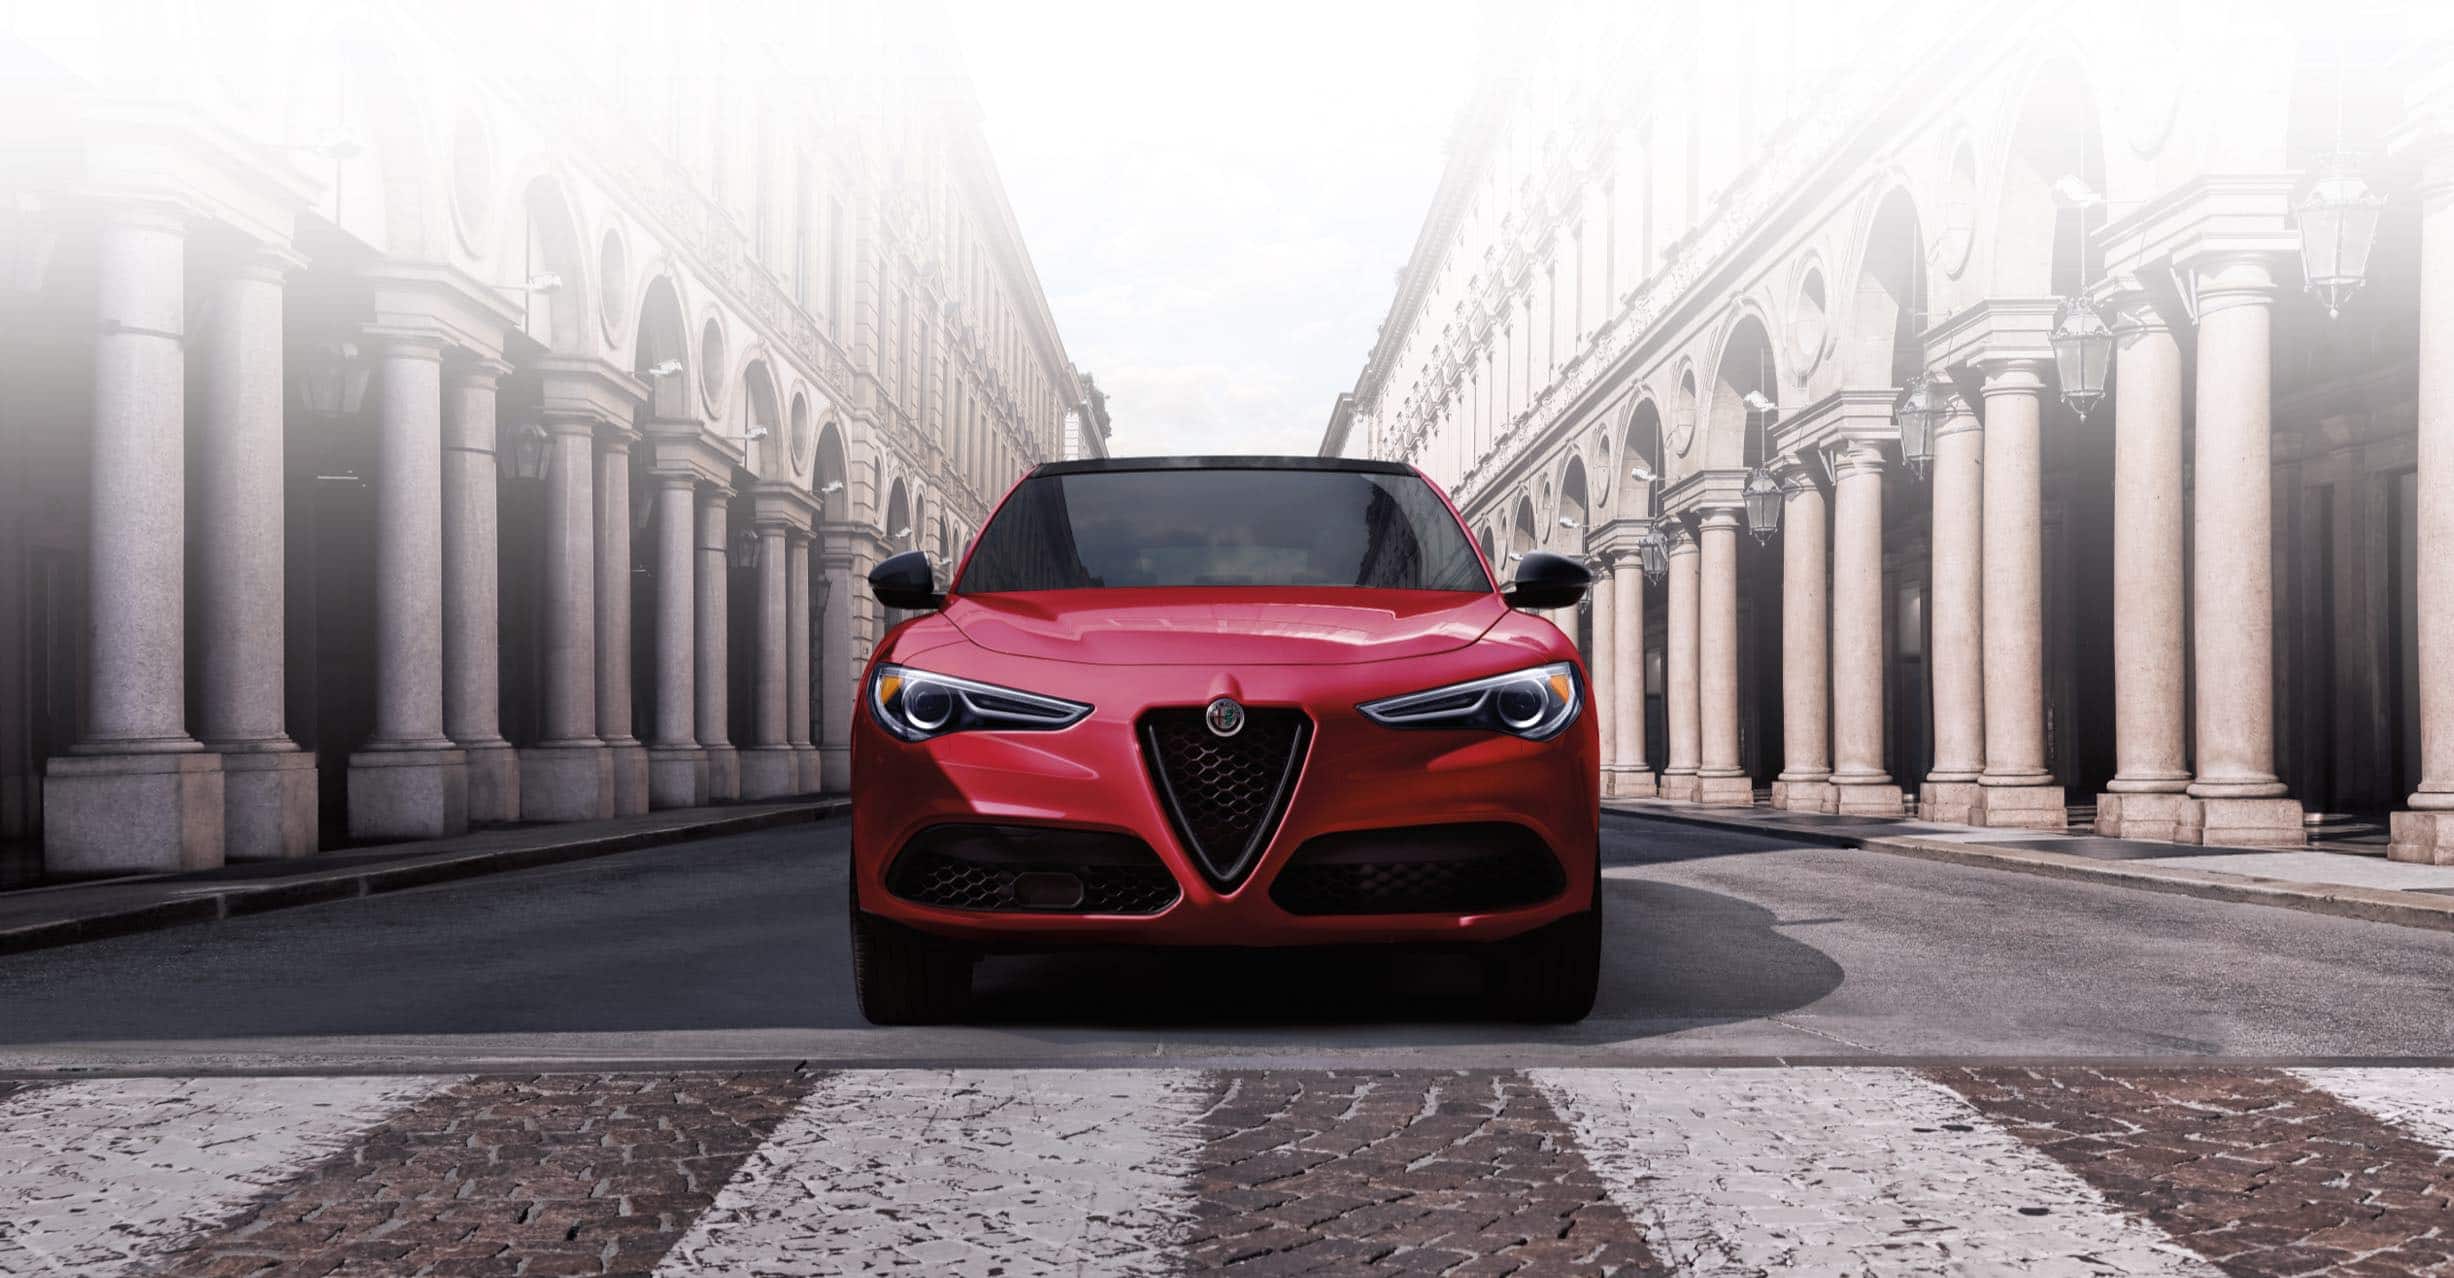 A front view of the 2022 Stelvio parked on a city street. Both sides of the street are lined with ornate columned building facades.